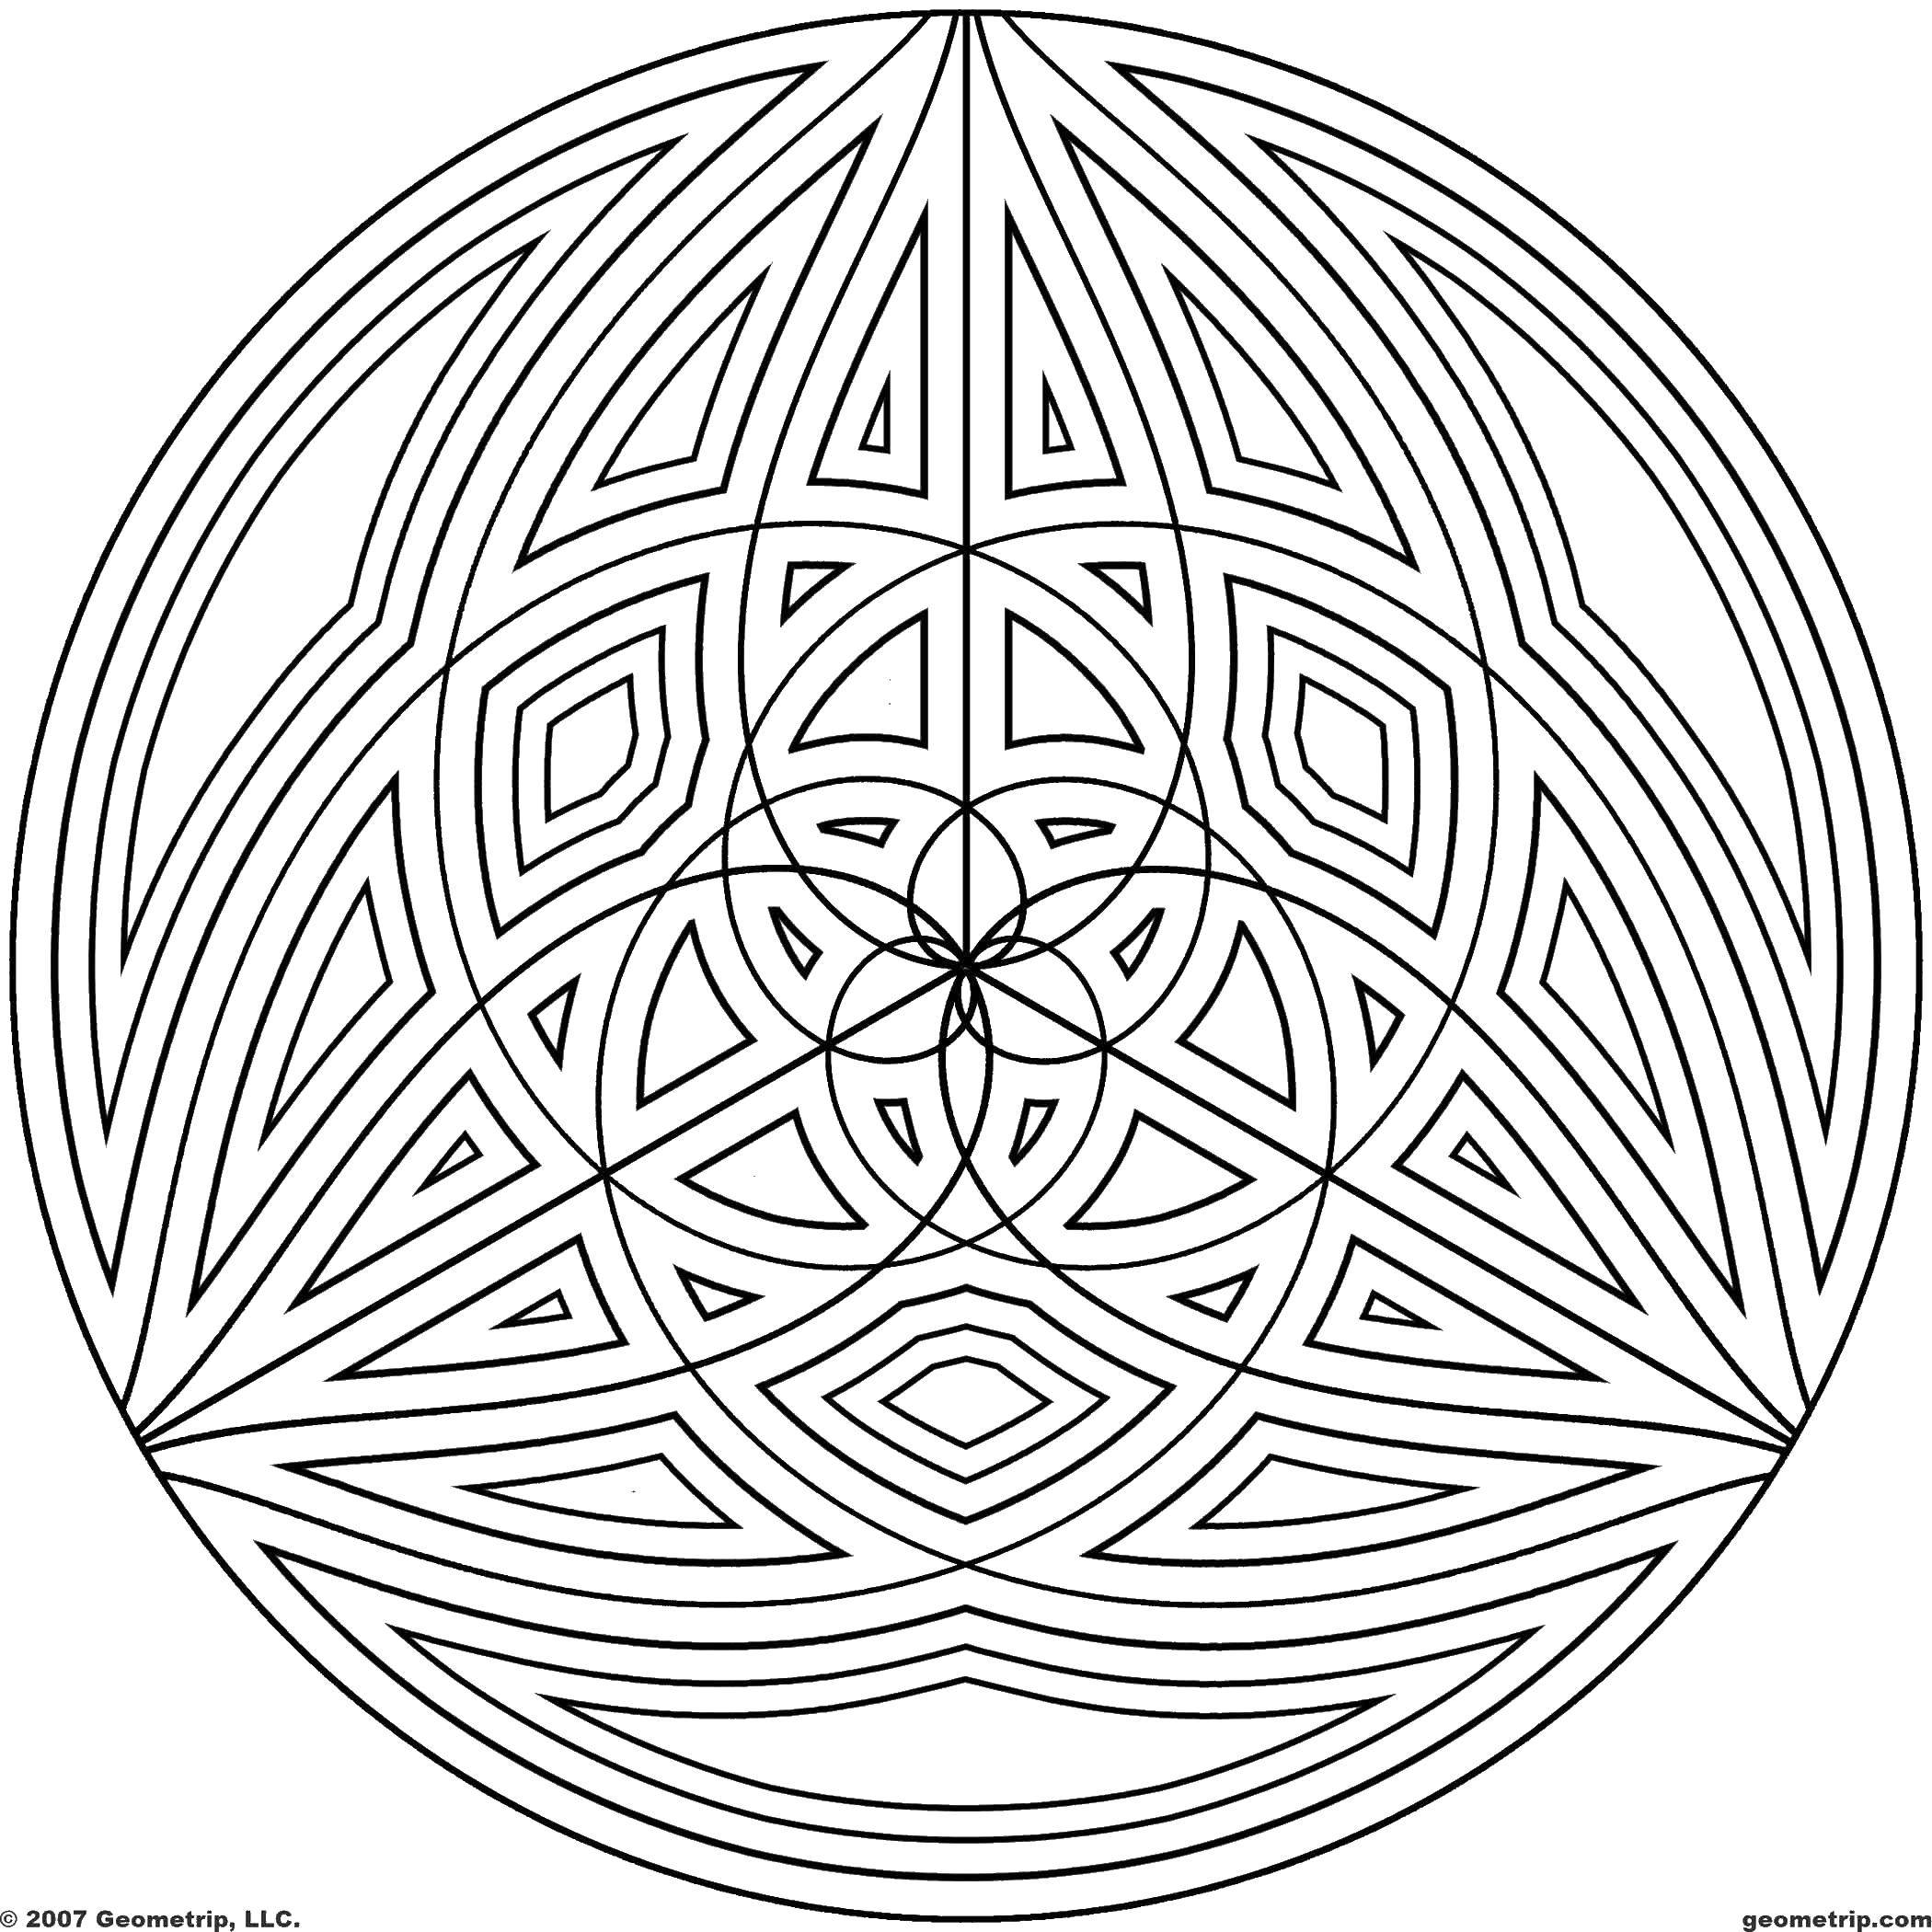 Coloring Circle patterns. Category With geometric shapes. Tags:  Patterns, geometric.